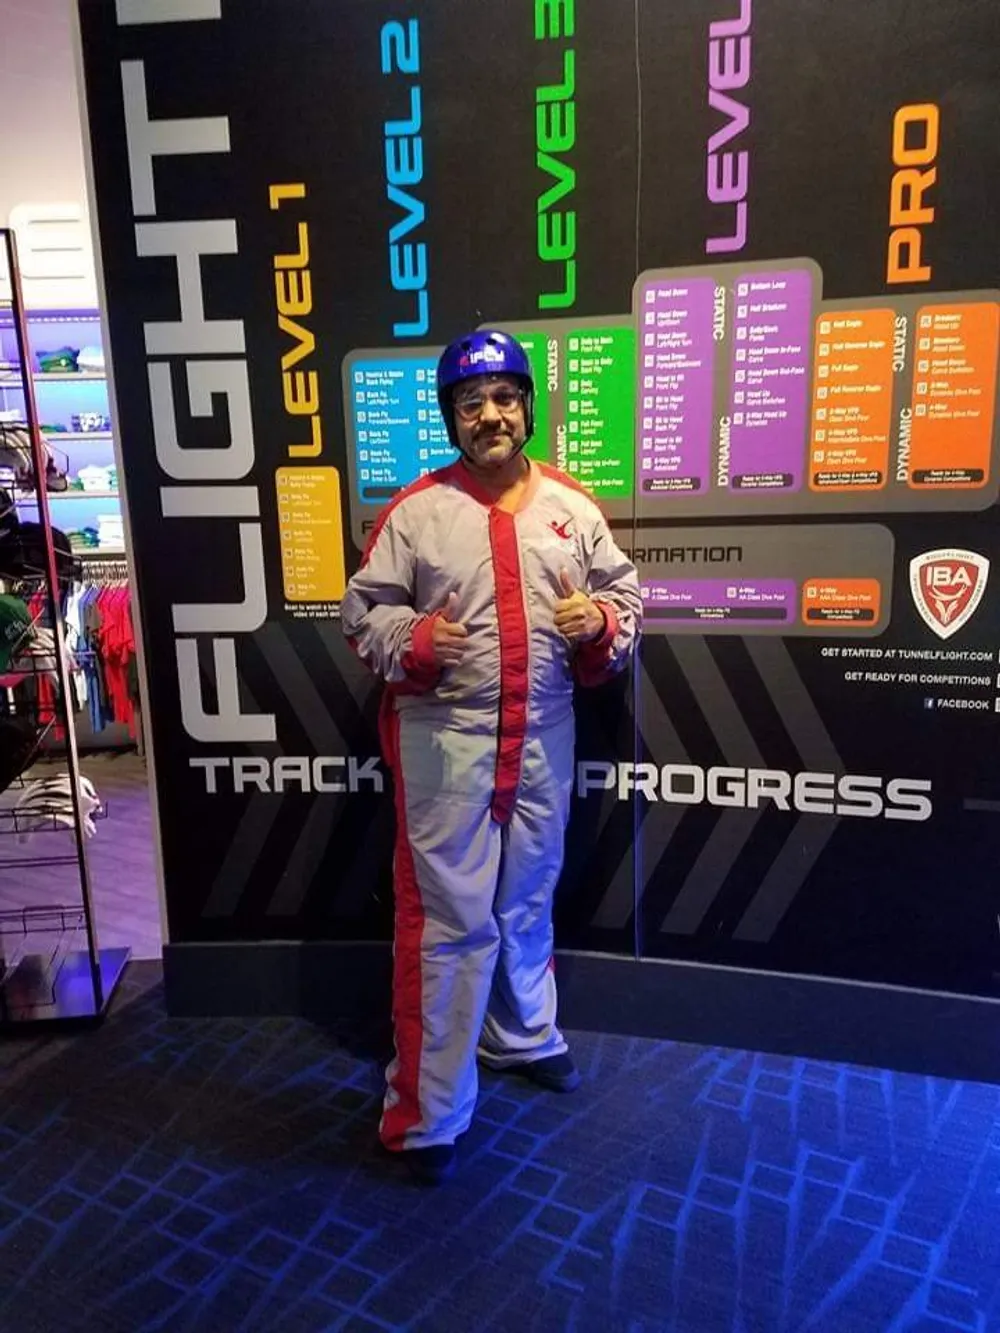 A person is giving a thumbs-up while wearing a flight suit and helmet standing in front of a wall that shows various levels of flight skills